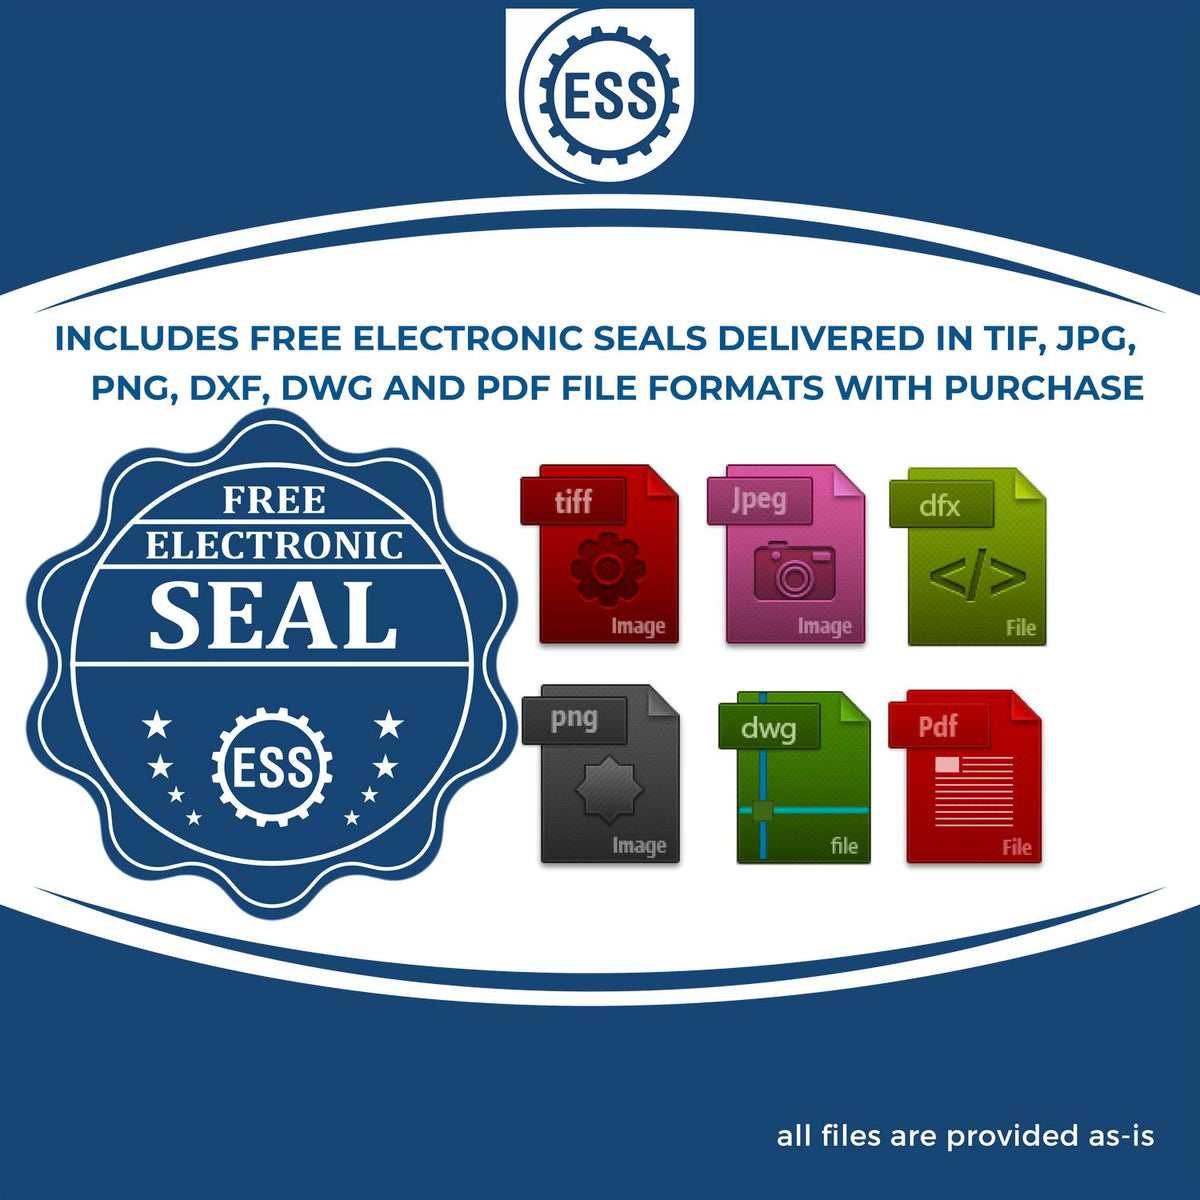 An infographic for the free electronic seal for the Soft Nebraska Professional Engineer Seal illustrating the different file type icons such as DXF, DWG, TIF, JPG and PNG.